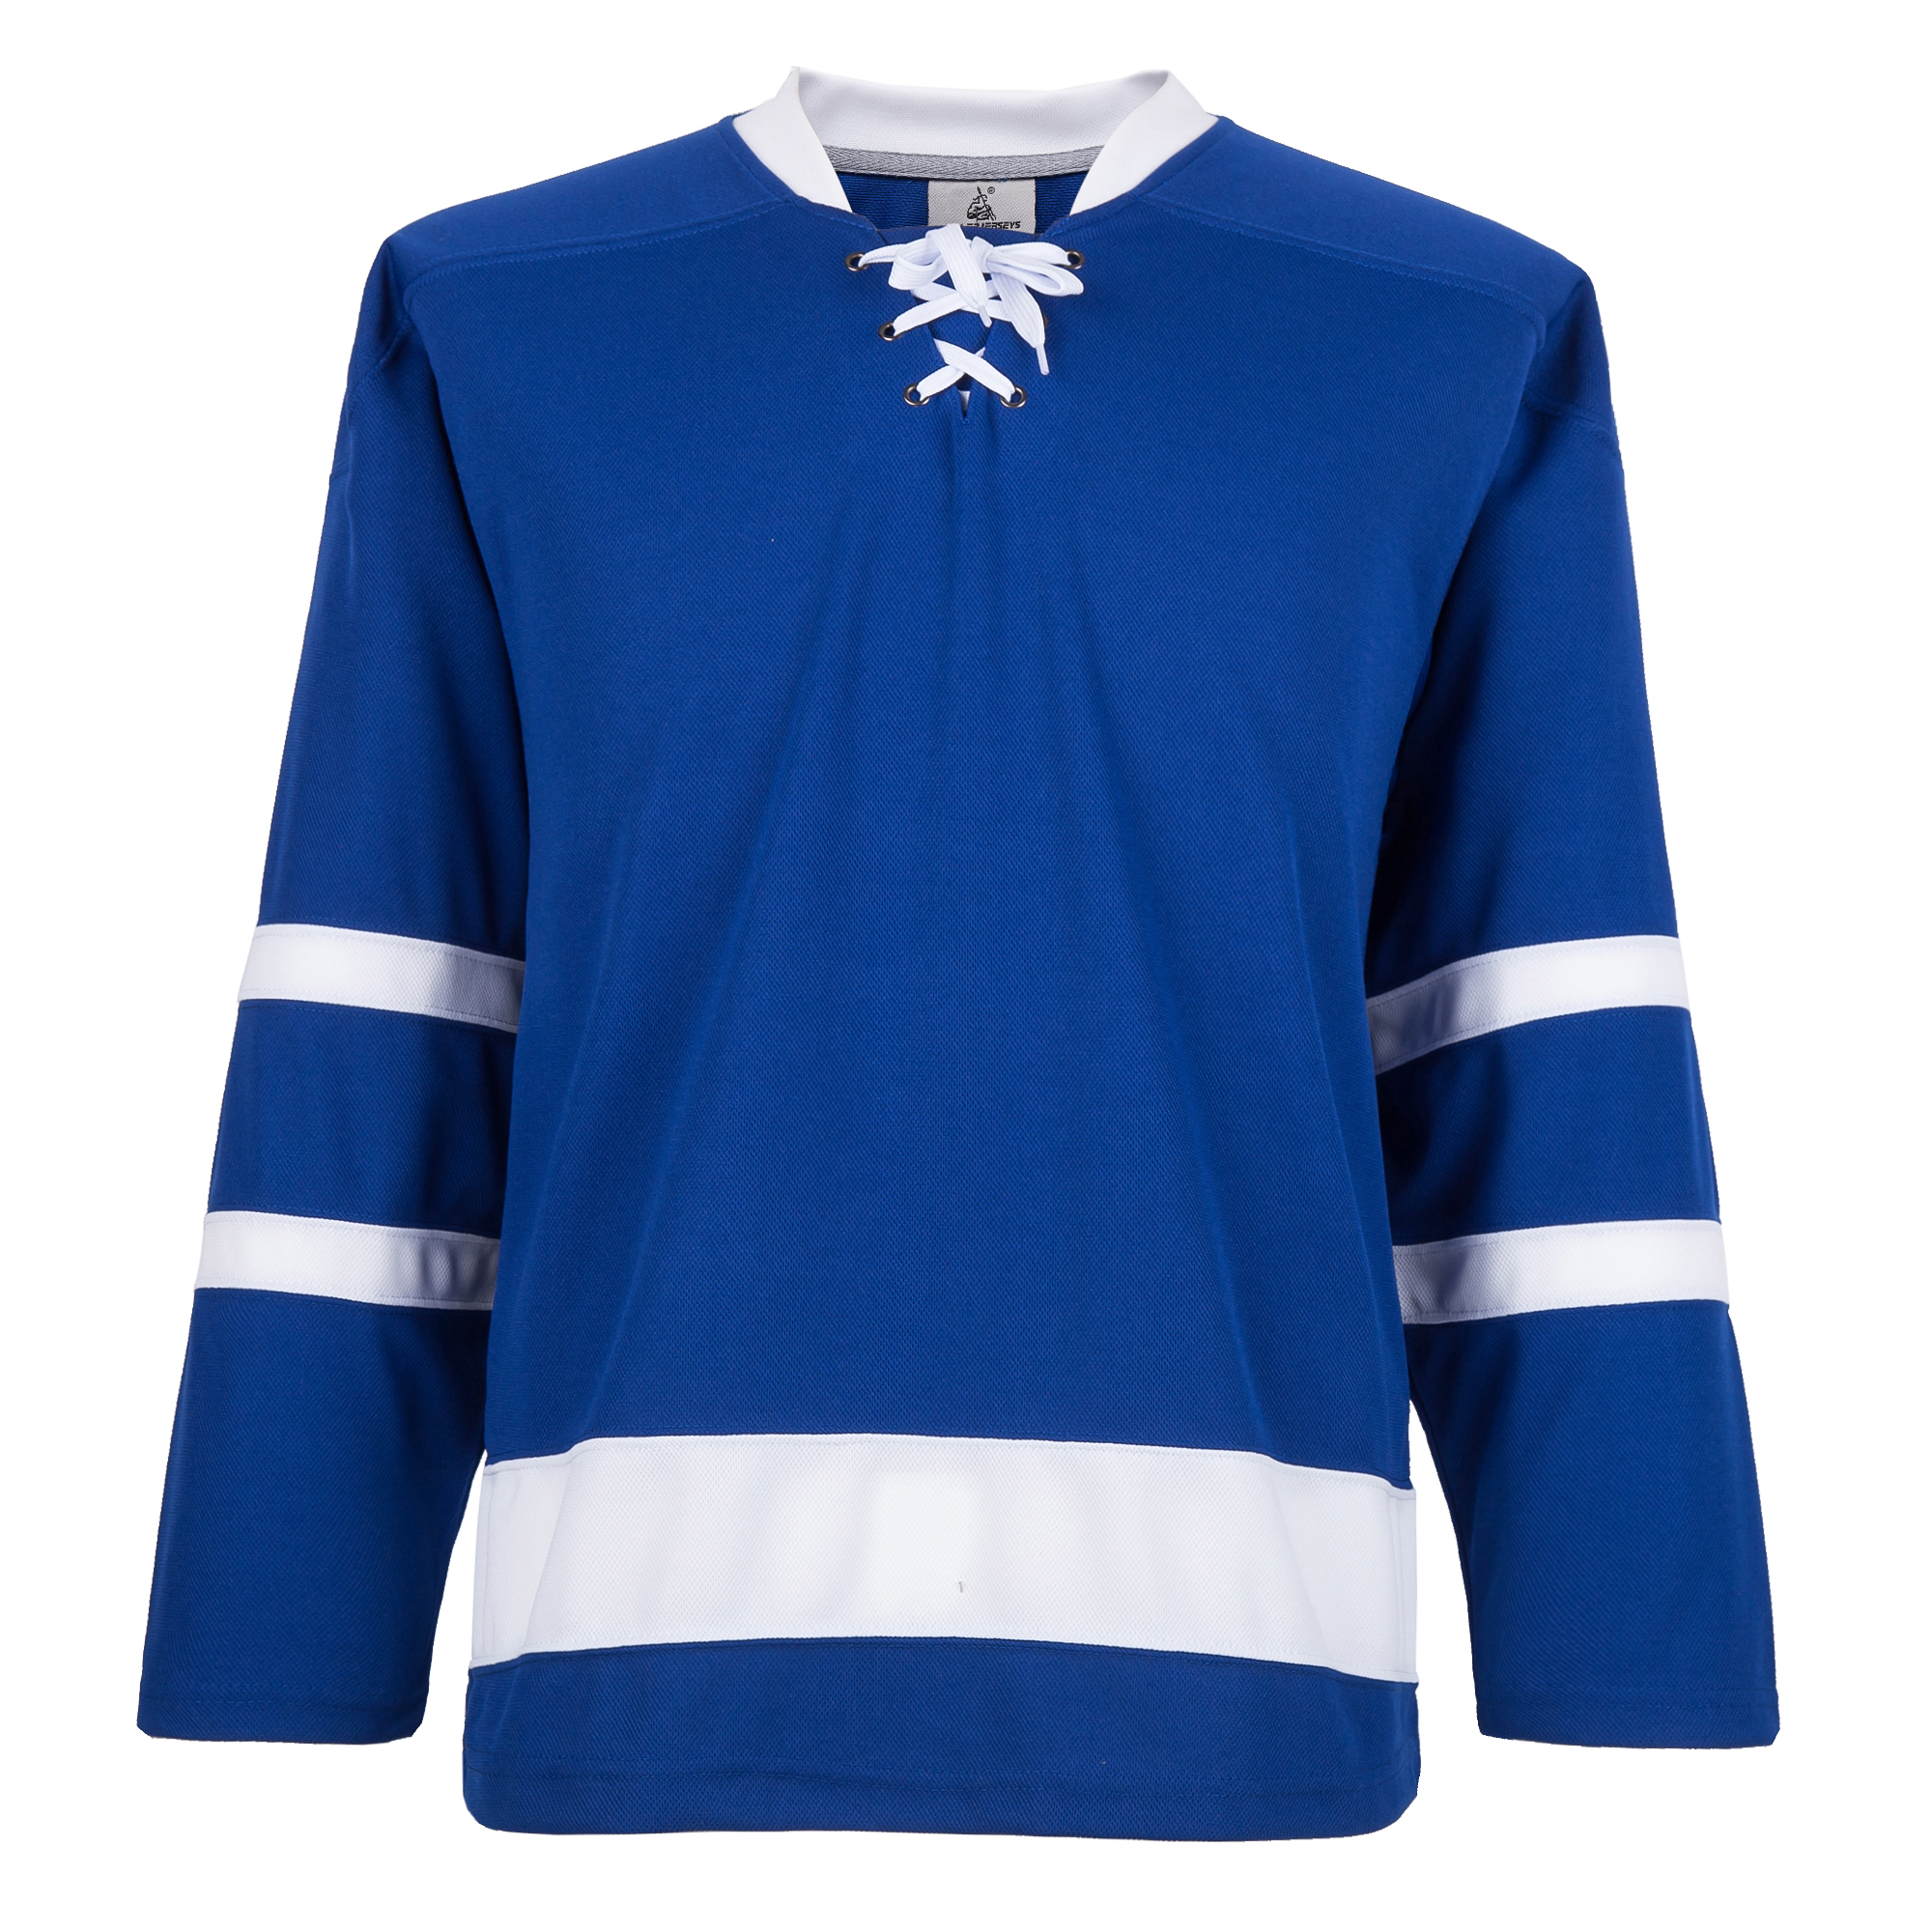 EALER H900 Series Ice Hockey League Team Color Blank Practice Jersey & Thick Breathable and Quick-Dry High Strength Fabric&Unisex Junior to Senior 